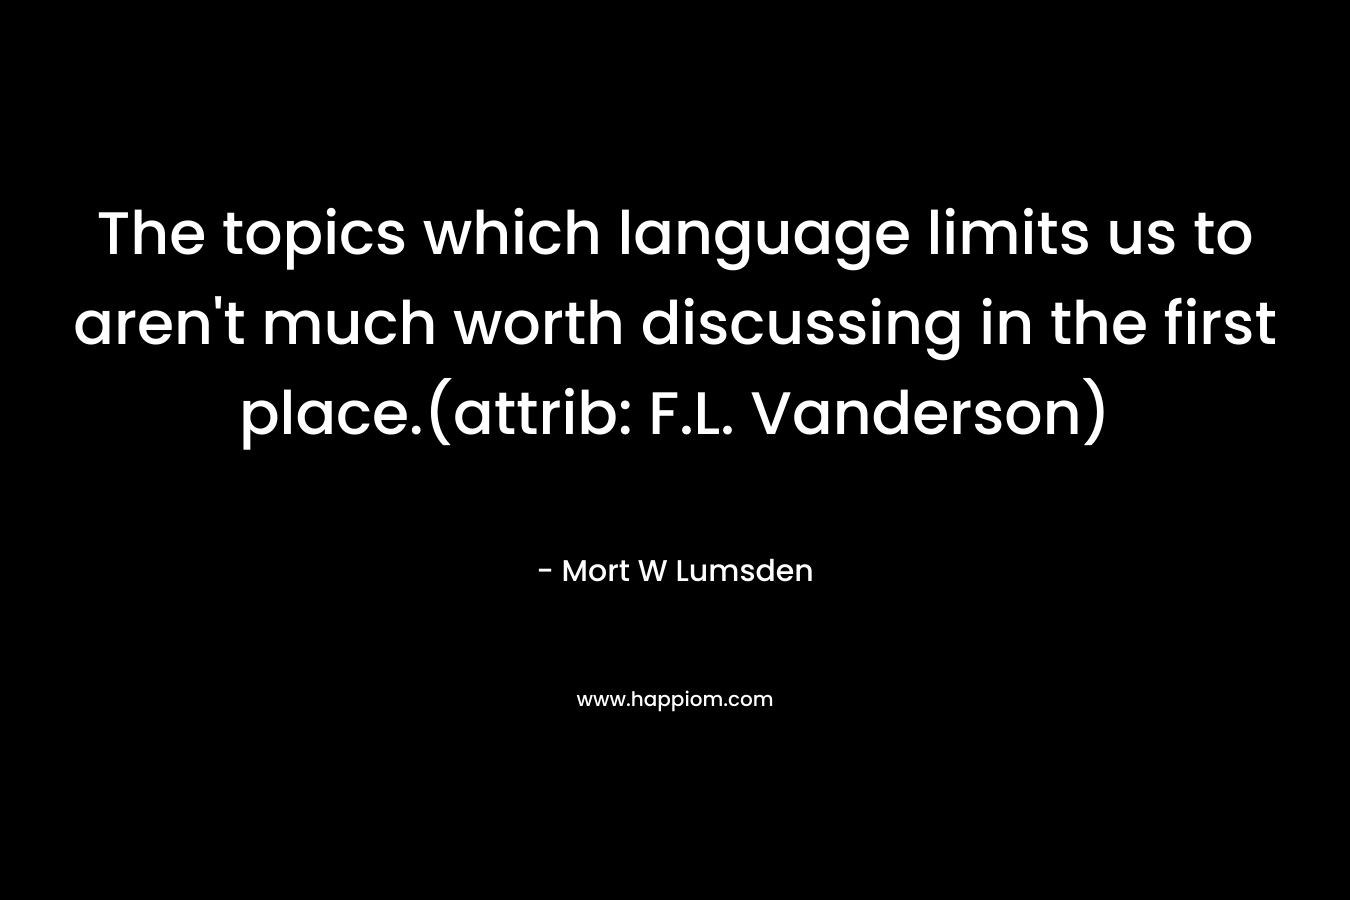 The topics which language limits us to aren't much worth discussing in the first place.(attrib: F.L. Vanderson)